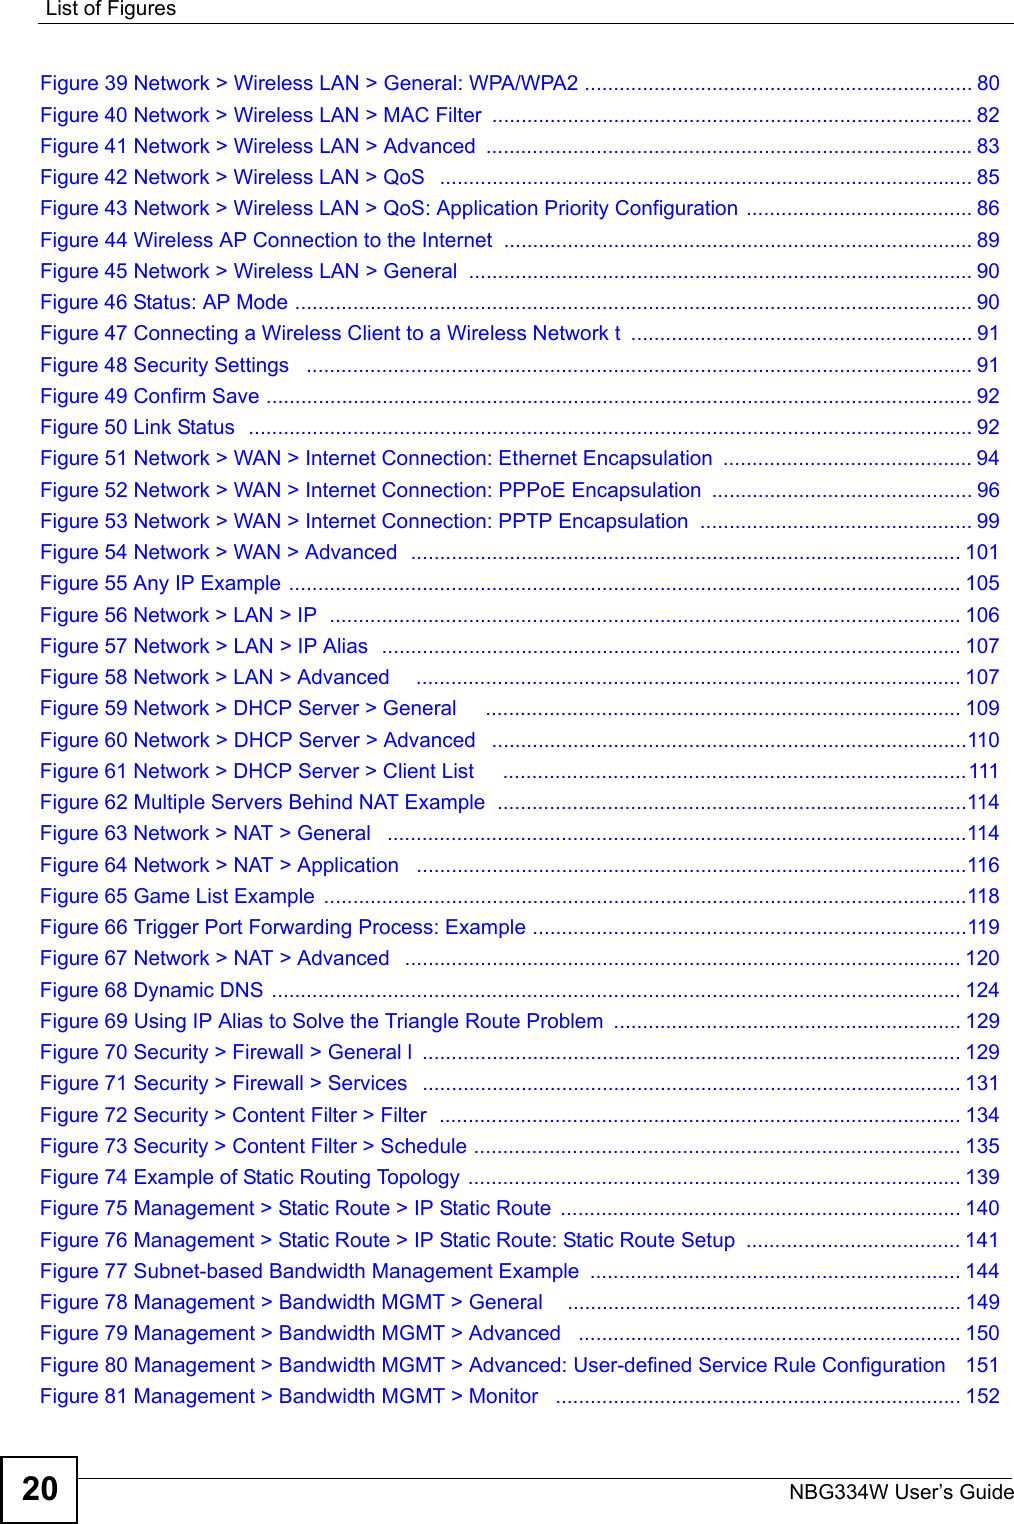 List of FiguresNBG334W User’s Guide20Figure 39 Network &gt; Wireless LAN &gt; General: WPA/WPA2 ................................................................... 80Figure 40 Network &gt; Wireless LAN &gt; MAC Filter  ................................................................................... 82Figure 41 Network &gt; Wireless LAN &gt; Advanced  ....................................................................................83Figure 42 Network &gt; Wireless LAN &gt; QoS   ............................................................................................ 85Figure 43 Network &gt; Wireless LAN &gt; QoS: Application Priority Configuration ....................................... 86Figure 44 Wireless AP Connection to the Internet  ................................................................................. 89Figure 45 Network &gt; Wireless LAN &gt; General  ....................................................................................... 90Figure 46 Status: AP Mode ..................................................................................................................... 90Figure 47 Connecting a Wireless Client to a Wireless Network t  ........................................................... 91Figure 48 Security Settings   ................................................................................................................... 91Figure 49 Confirm Save .......................................................................................................................... 92Figure 50 Link Status  ............................................................................................................................. 92Figure 51 Network &gt; WAN &gt; Internet Connection: Ethernet Encapsulation  ........................................... 94Figure 52 Network &gt; WAN &gt; Internet Connection: PPPoE Encapsulation  ............................................. 96Figure 53 Network &gt; WAN &gt; Internet Connection: PPTP Encapsulation  ............................................... 99Figure 54 Network &gt; WAN &gt; Advanced  ............................................................................................... 101Figure 55 Any IP Example .................................................................................................................... 105Figure 56 Network &gt; LAN &gt; IP  ............................................................................................................. 106Figure 57 Network &gt; LAN &gt; IP Alias  .................................................................................................... 107Figure 58 Network &gt; LAN &gt; Advanced     .............................................................................................. 107Figure 59 Network &gt; DHCP Server &gt; General     .................................................................................. 109Figure 60 Network &gt; DHCP Server &gt; Advanced   ..................................................................................110Figure 61 Network &gt; DHCP Server &gt; Client List     ................................................................................ 111Figure 62 Multiple Servers Behind NAT Example  .................................................................................114Figure 63 Network &gt; NAT &gt; General   ....................................................................................................114Figure 64 Network &gt; NAT &gt; Application   ...............................................................................................116Figure 65 Game List Example  ...............................................................................................................118Figure 66 Trigger Port Forwarding Process: Example ...........................................................................119Figure 67 Network &gt; NAT &gt; Advanced   ................................................................................................ 120Figure 68 Dynamic DNS ....................................................................................................................... 124Figure 69 Using IP Alias to Solve the Triangle Route Problem  ............................................................ 129Figure 70 Security &gt; Firewall &gt; General l  ............................................................................................. 129Figure 71 Security &gt; Firewall &gt; Services   ............................................................................................. 131Figure 72 Security &gt; Content Filter &gt; Filter  .......................................................................................... 134Figure 73 Security &gt; Content Filter &gt; Schedule .................................................................................... 135Figure 74 Example of Static Routing Topology ..................................................................................... 139Figure 75 Management &gt; Static Route &gt; IP Static Route  ..................................................................... 140Figure 76 Management &gt; Static Route &gt; IP Static Route: Static Route Setup  ..................................... 141Figure 77 Subnet-based Bandwidth Management Example  ................................................................ 144Figure 78 Management &gt; Bandwidth MGMT &gt; General    .................................................................... 149Figure 79 Management &gt; Bandwidth MGMT &gt; Advanced   .................................................................. 150Figure 80 Management &gt; Bandwidth MGMT &gt; Advanced: User-defined Service Rule Configuration   151Figure 81 Management &gt; Bandwidth MGMT &gt; Monitor   ...................................................................... 152